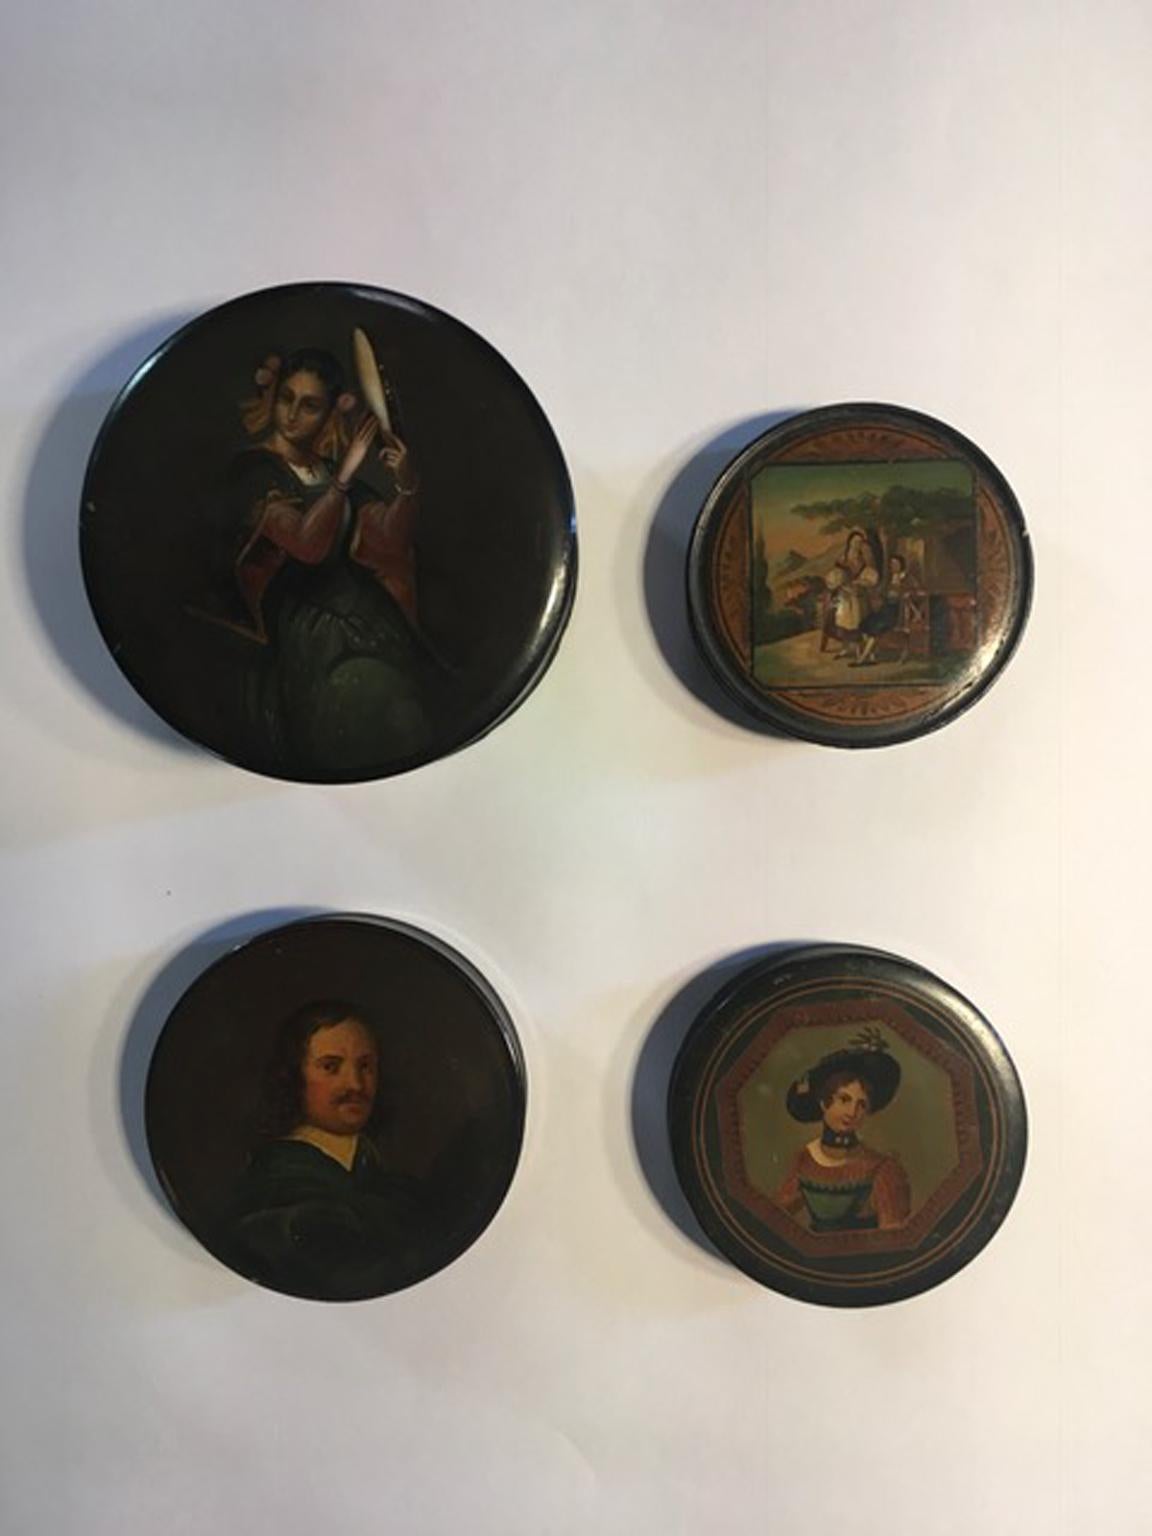 Baroque Mid-18th Century Set of Four Lacquered Wood Boxes with Portraits